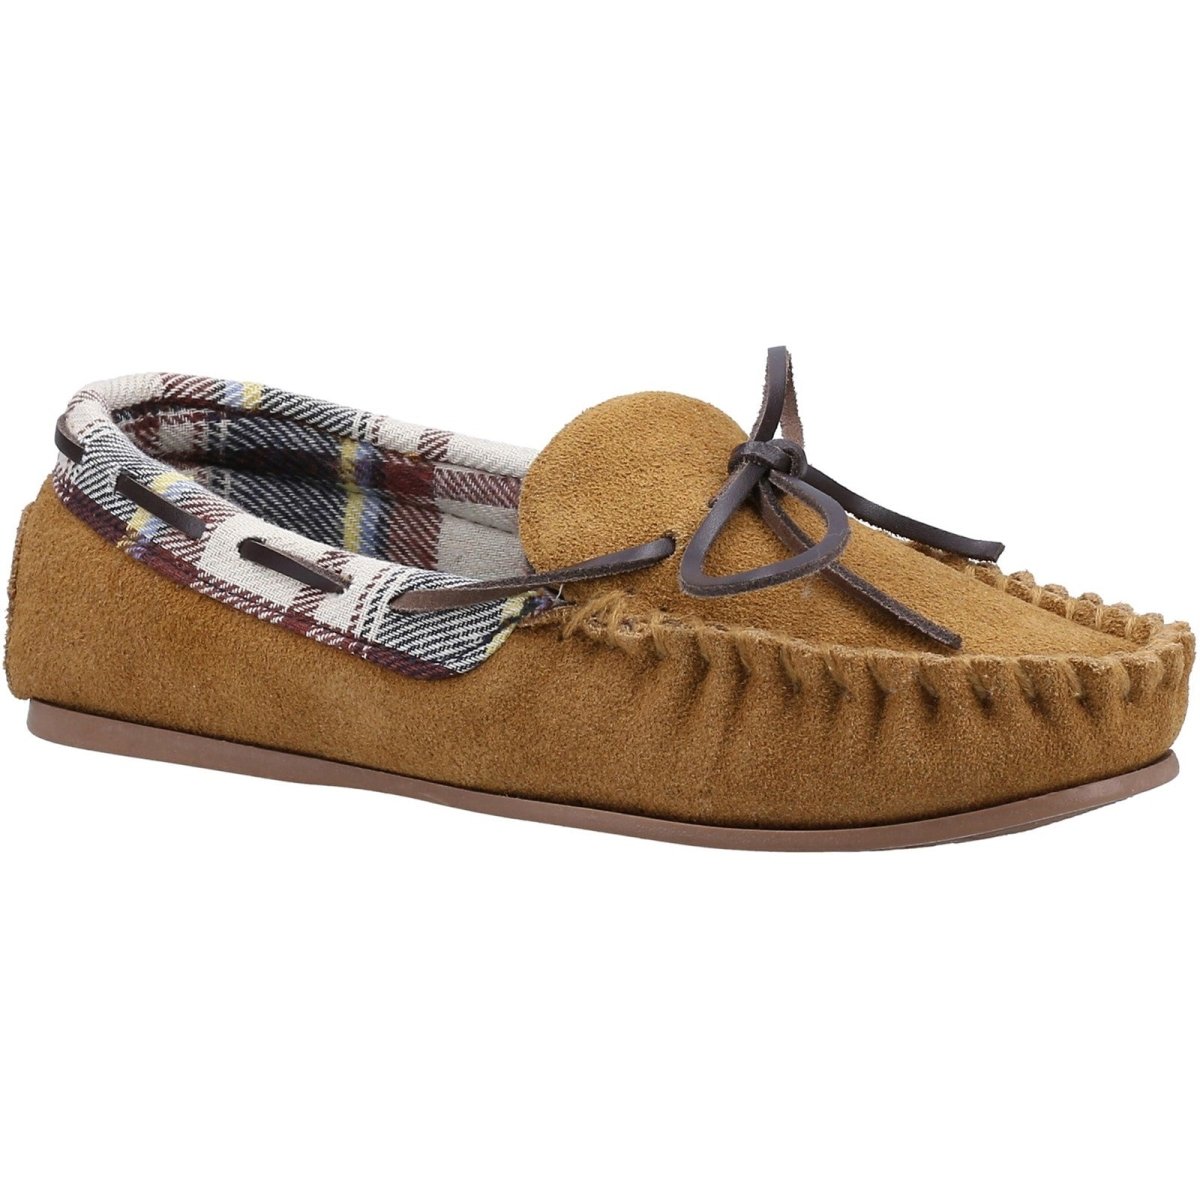 Cotswold Chatsworth Slippers - Shoe Store Direct